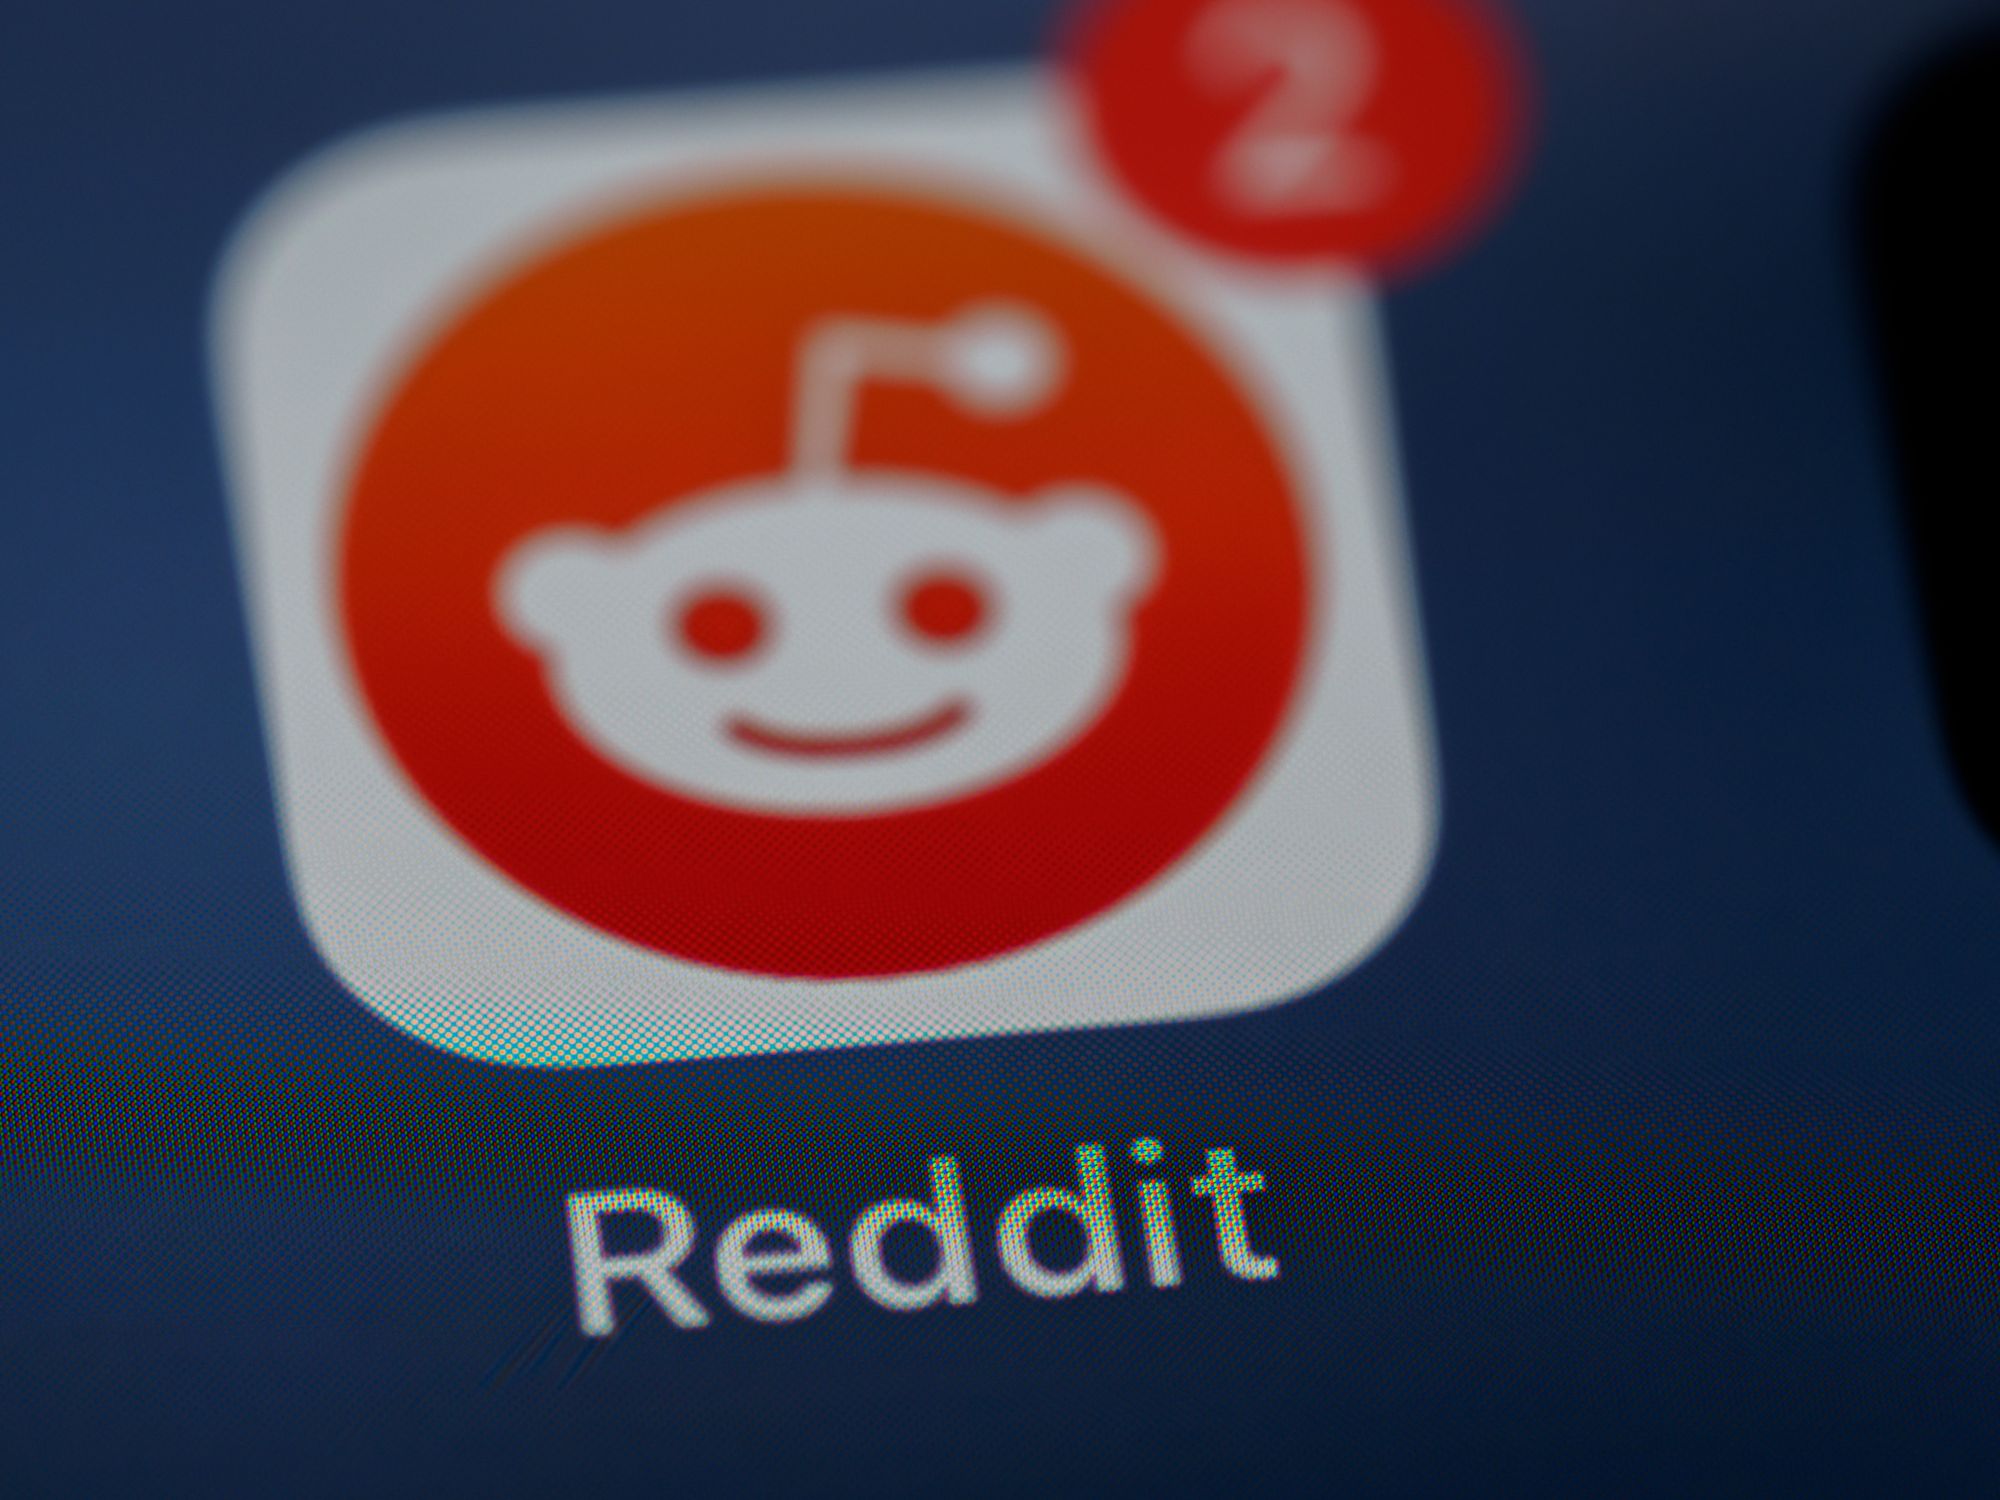 Reddit Resilience: Strong Performance Amid Controversy